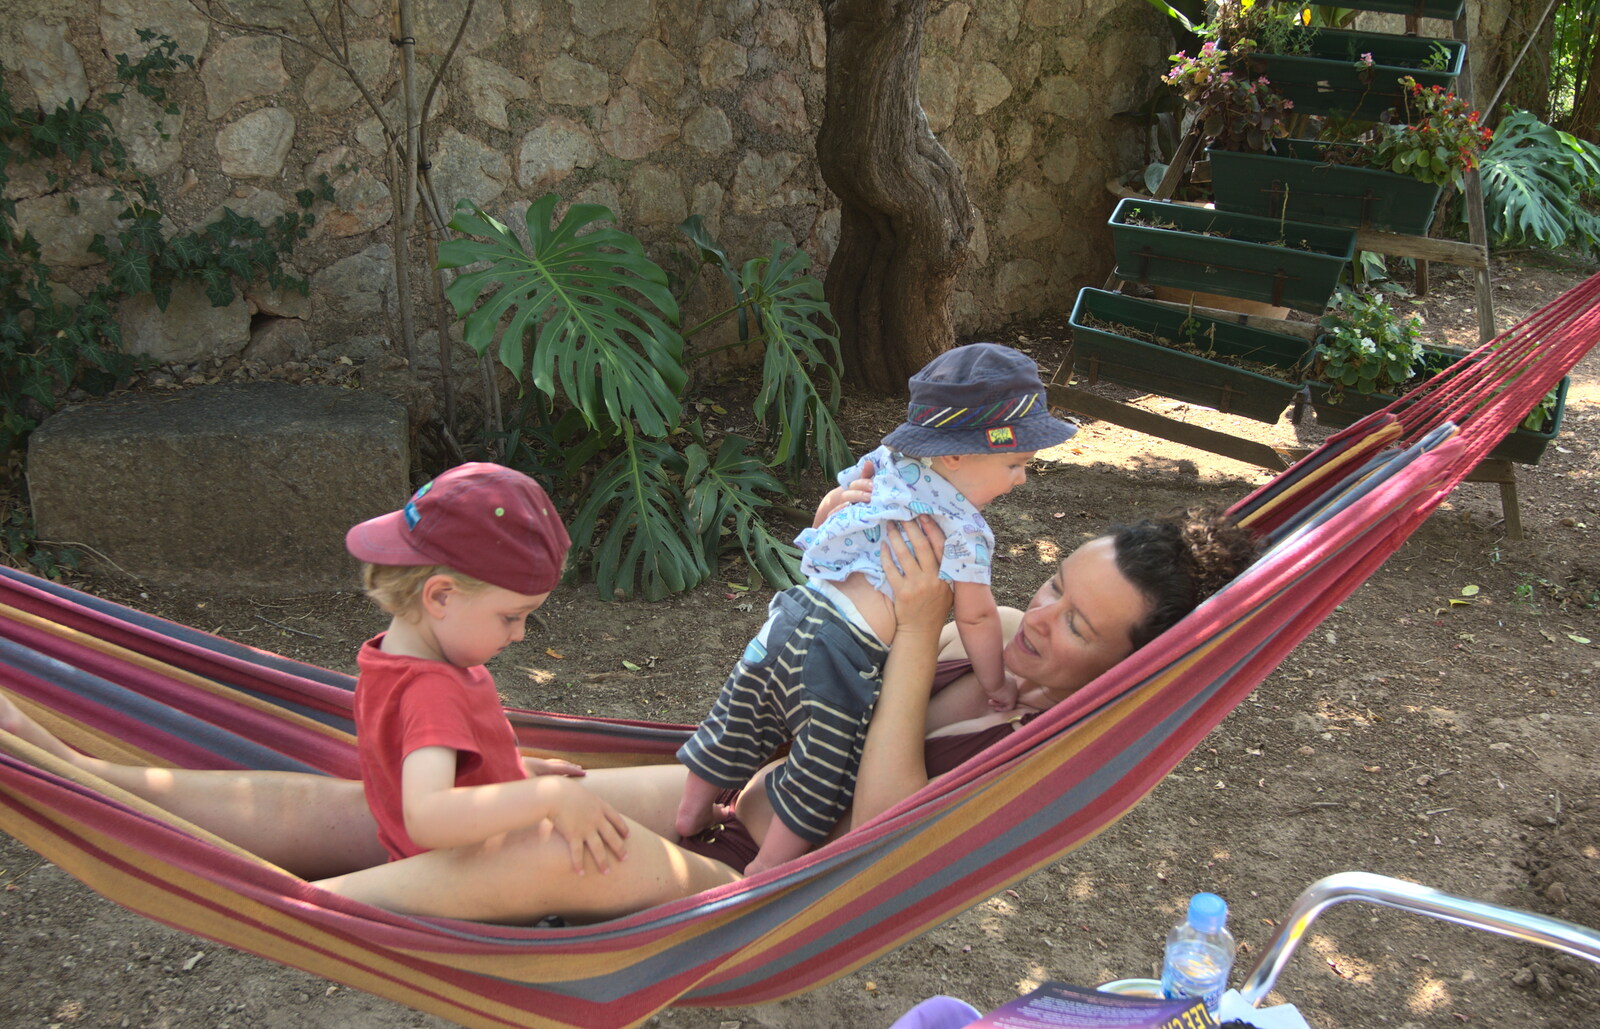 Fred, Harry and Evelyn in the hammock from A Trip to Sóller, Mallorca, Spain - 8th-14th September 2012